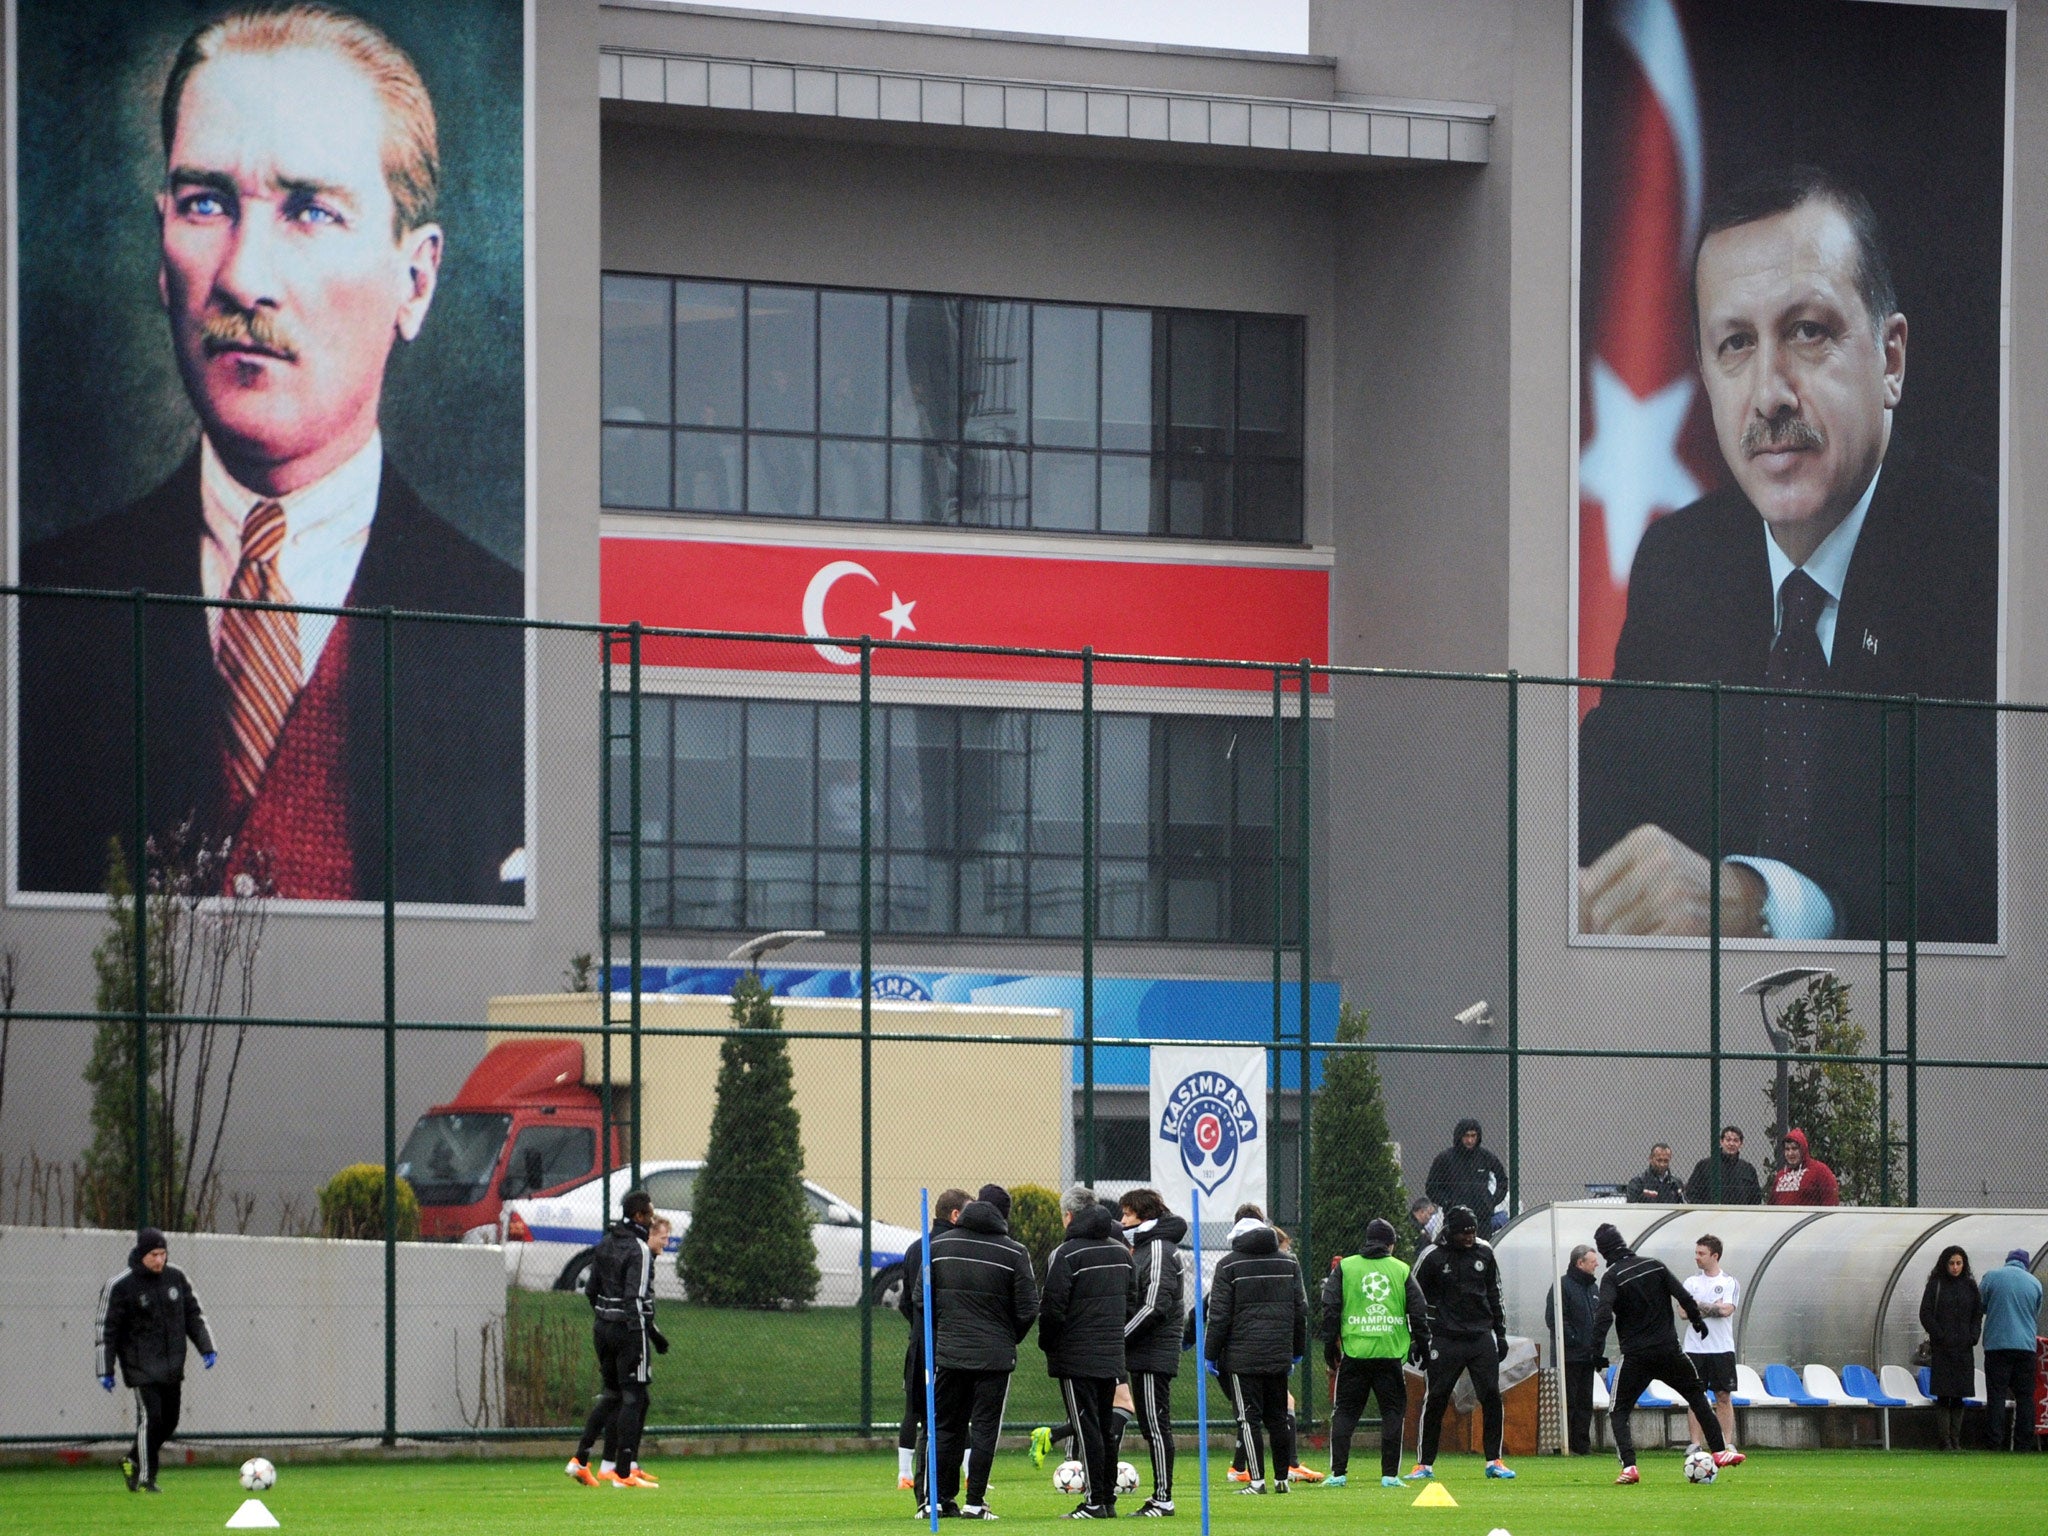 Large posters of Mustafa Kemal Ataturk (L), the late founder of modern Turkey, and of Prime minister Recep Tayyip Erdogan (R) hang on the side of a building as Chelsea players take part in a training in Istanbul